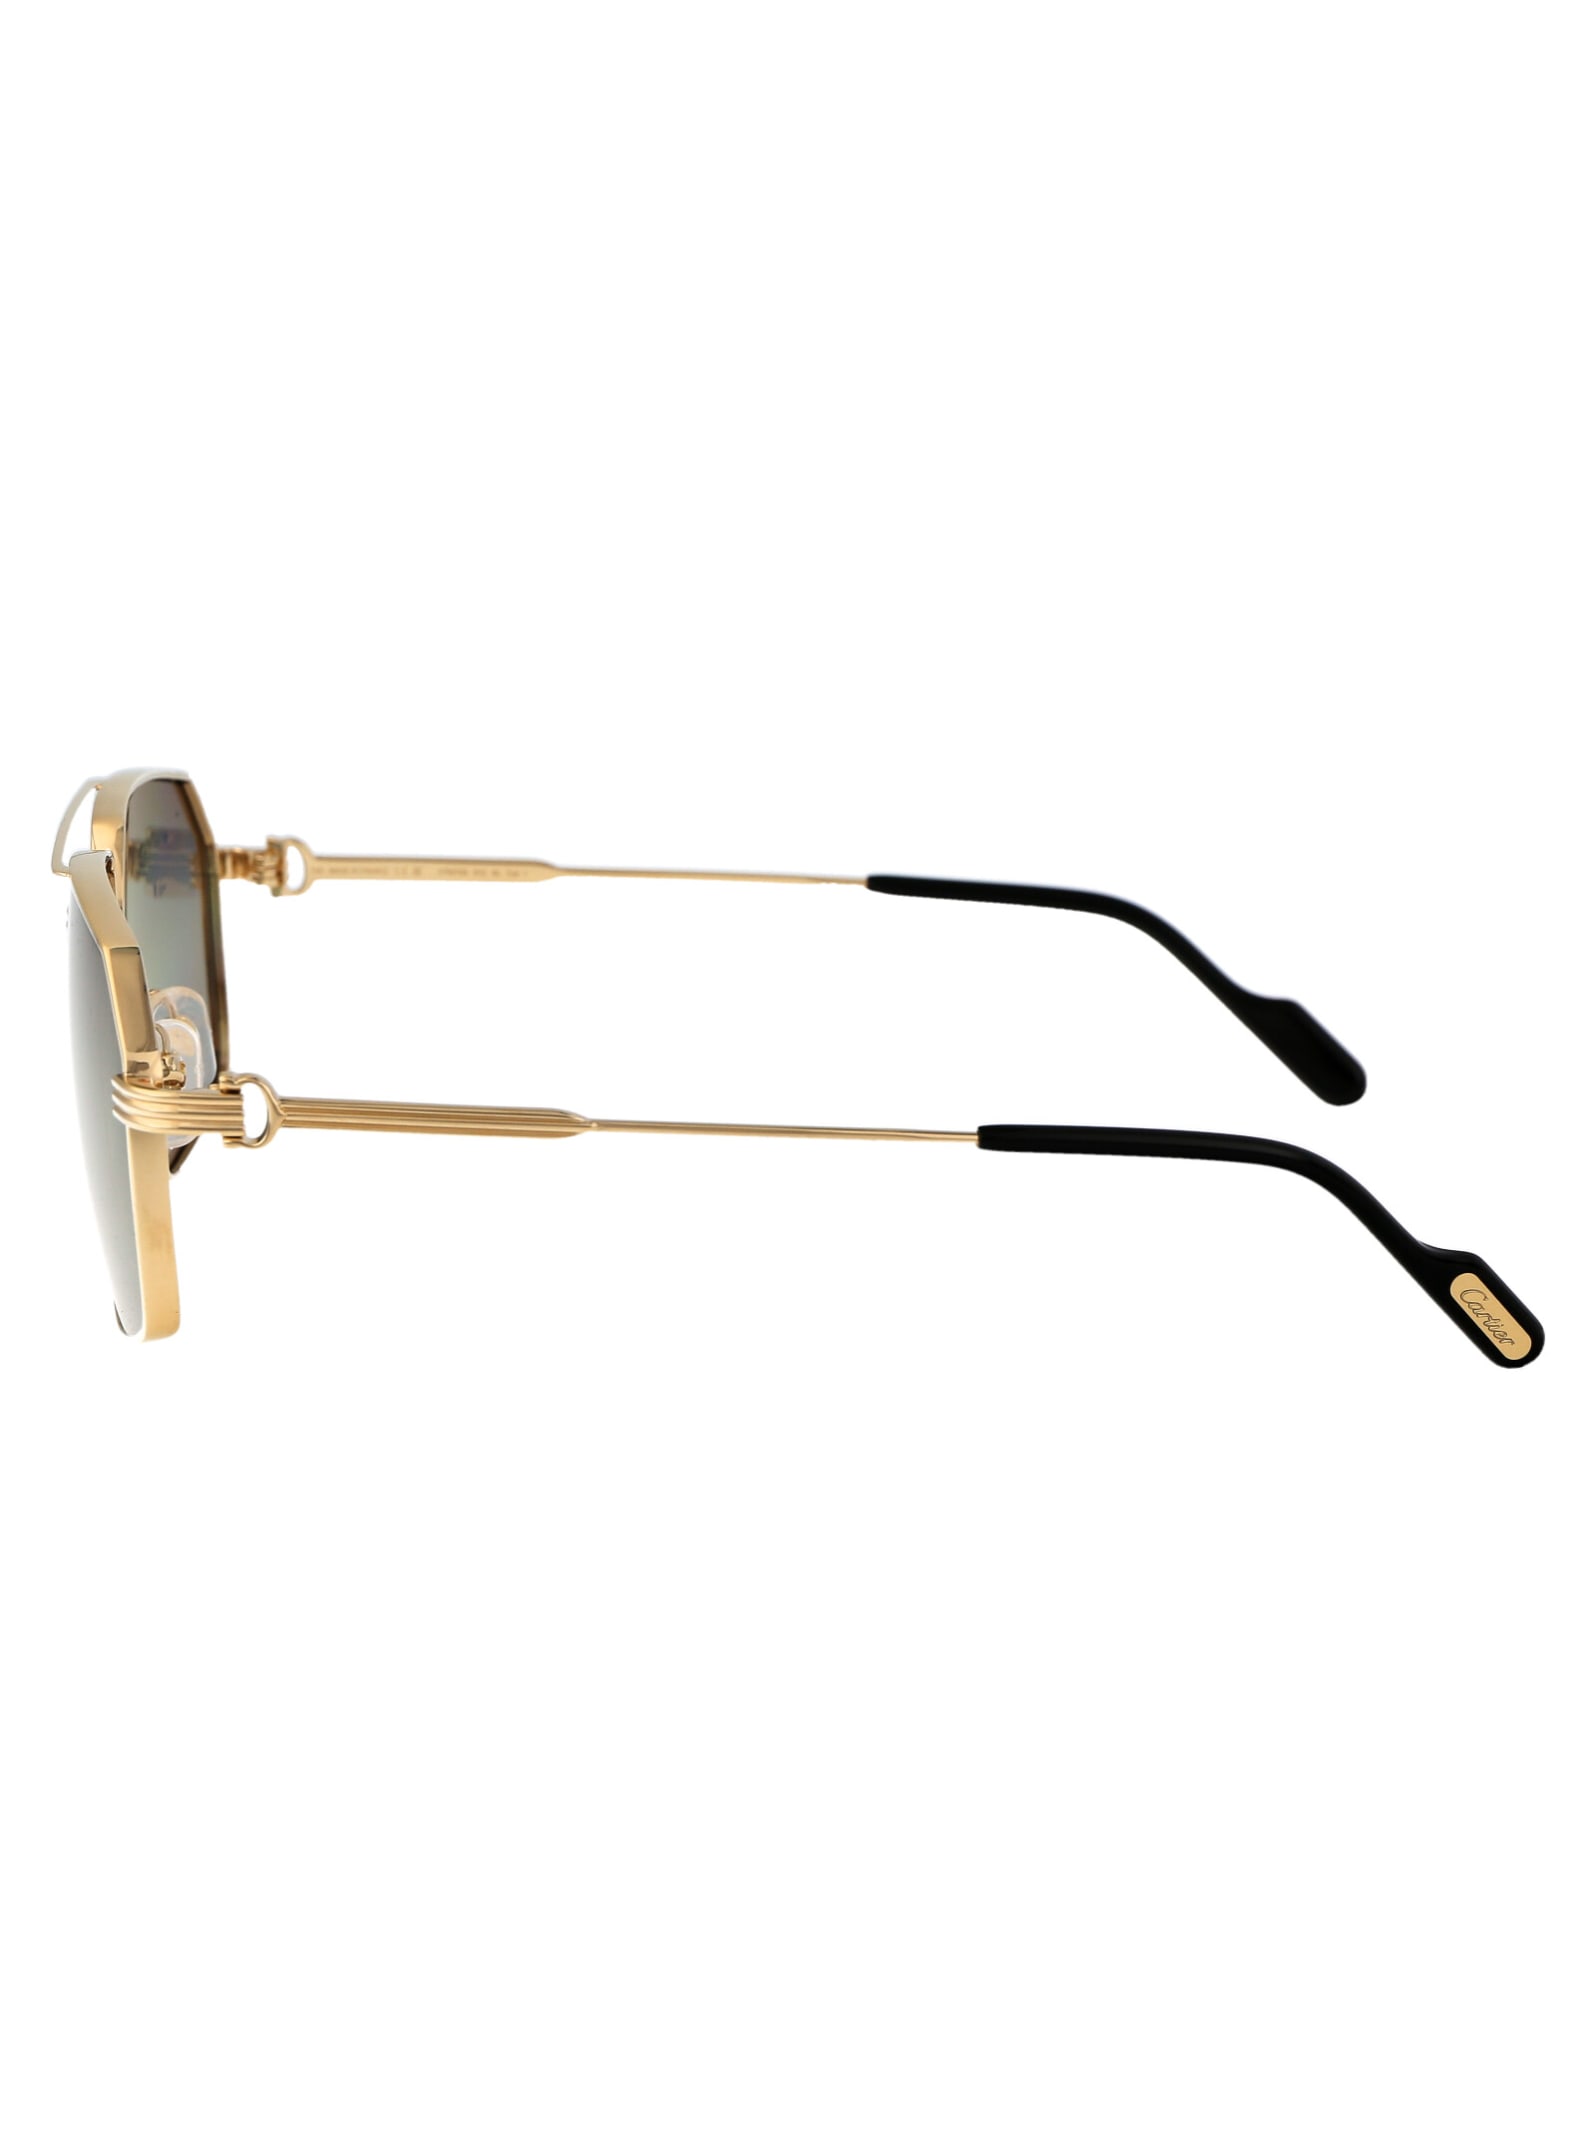 Shop Cartier Ct0270s Sunglasses In 012 Gold Gold Violet